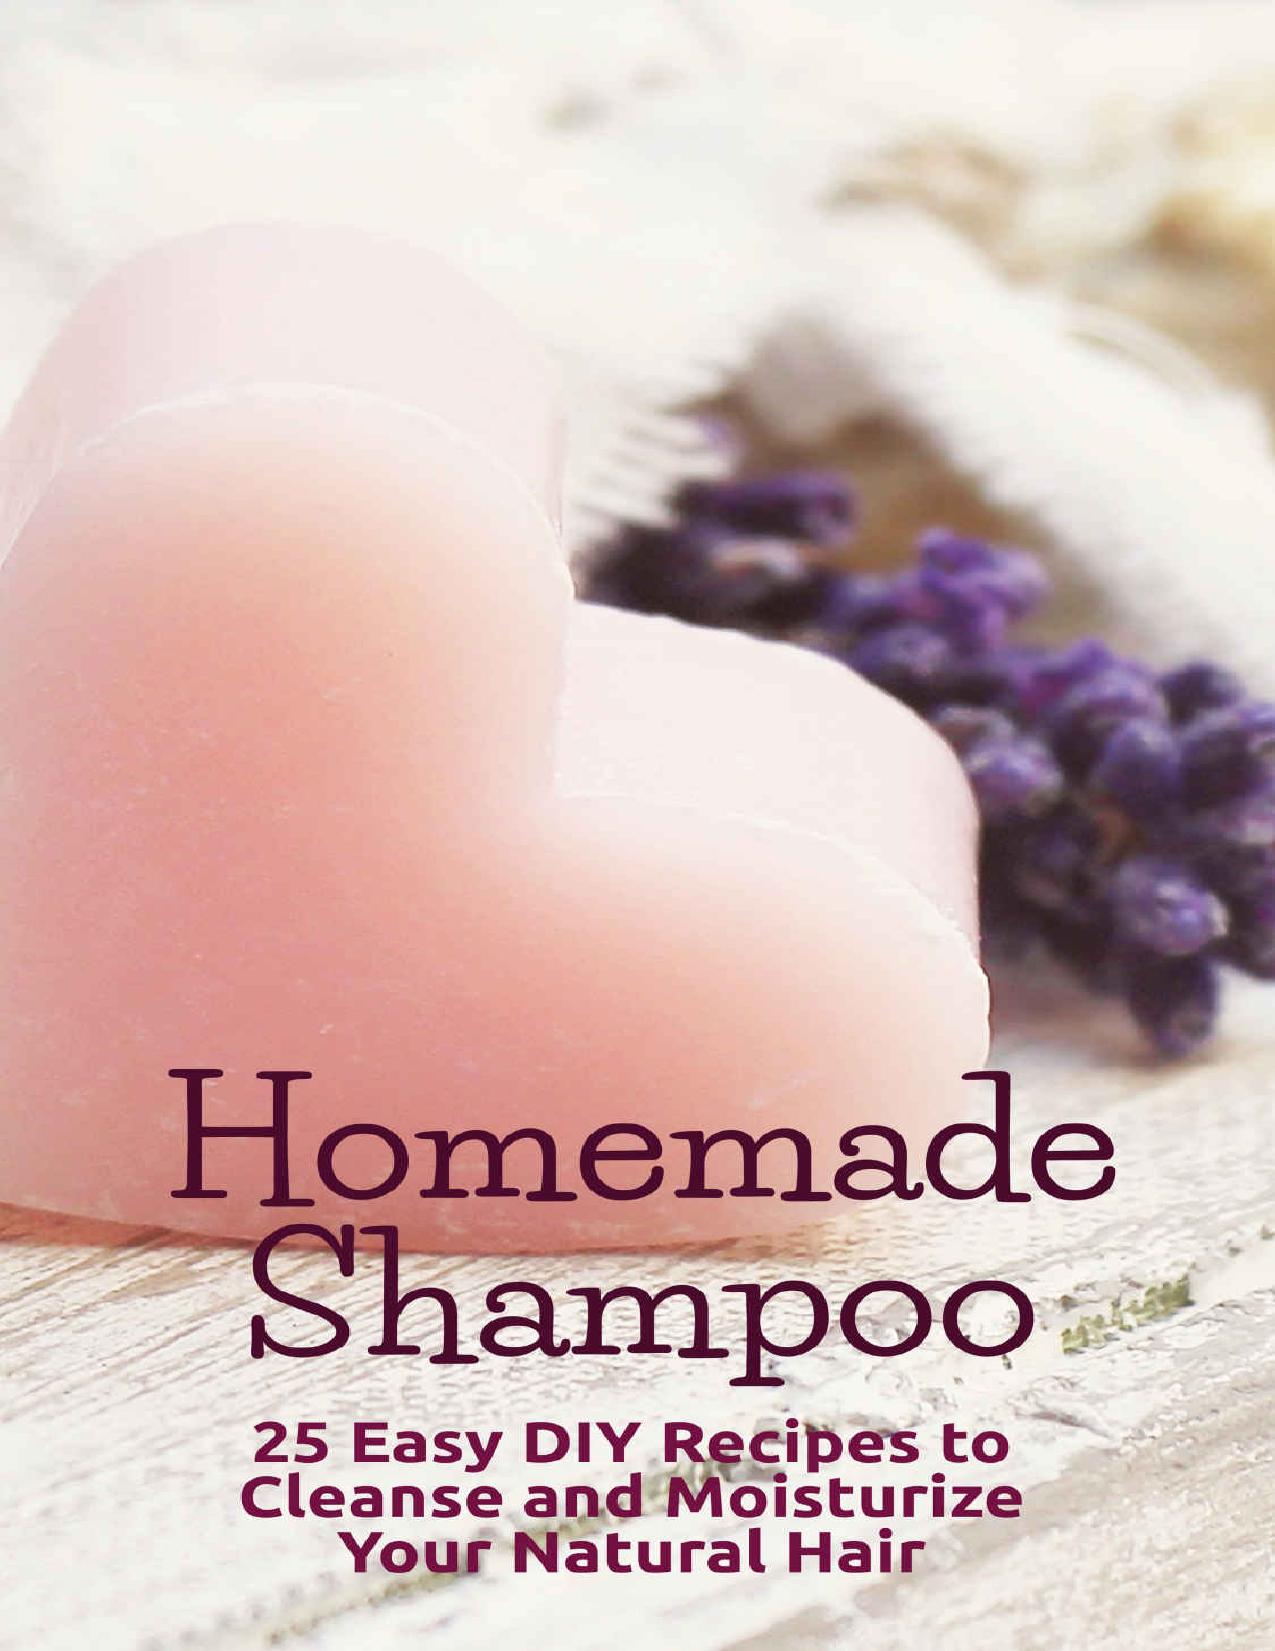 Homemade Shampoo: 25 Easy DIY Recipes to Cleanse and Moisturize Your Natural Hair by CliShea B